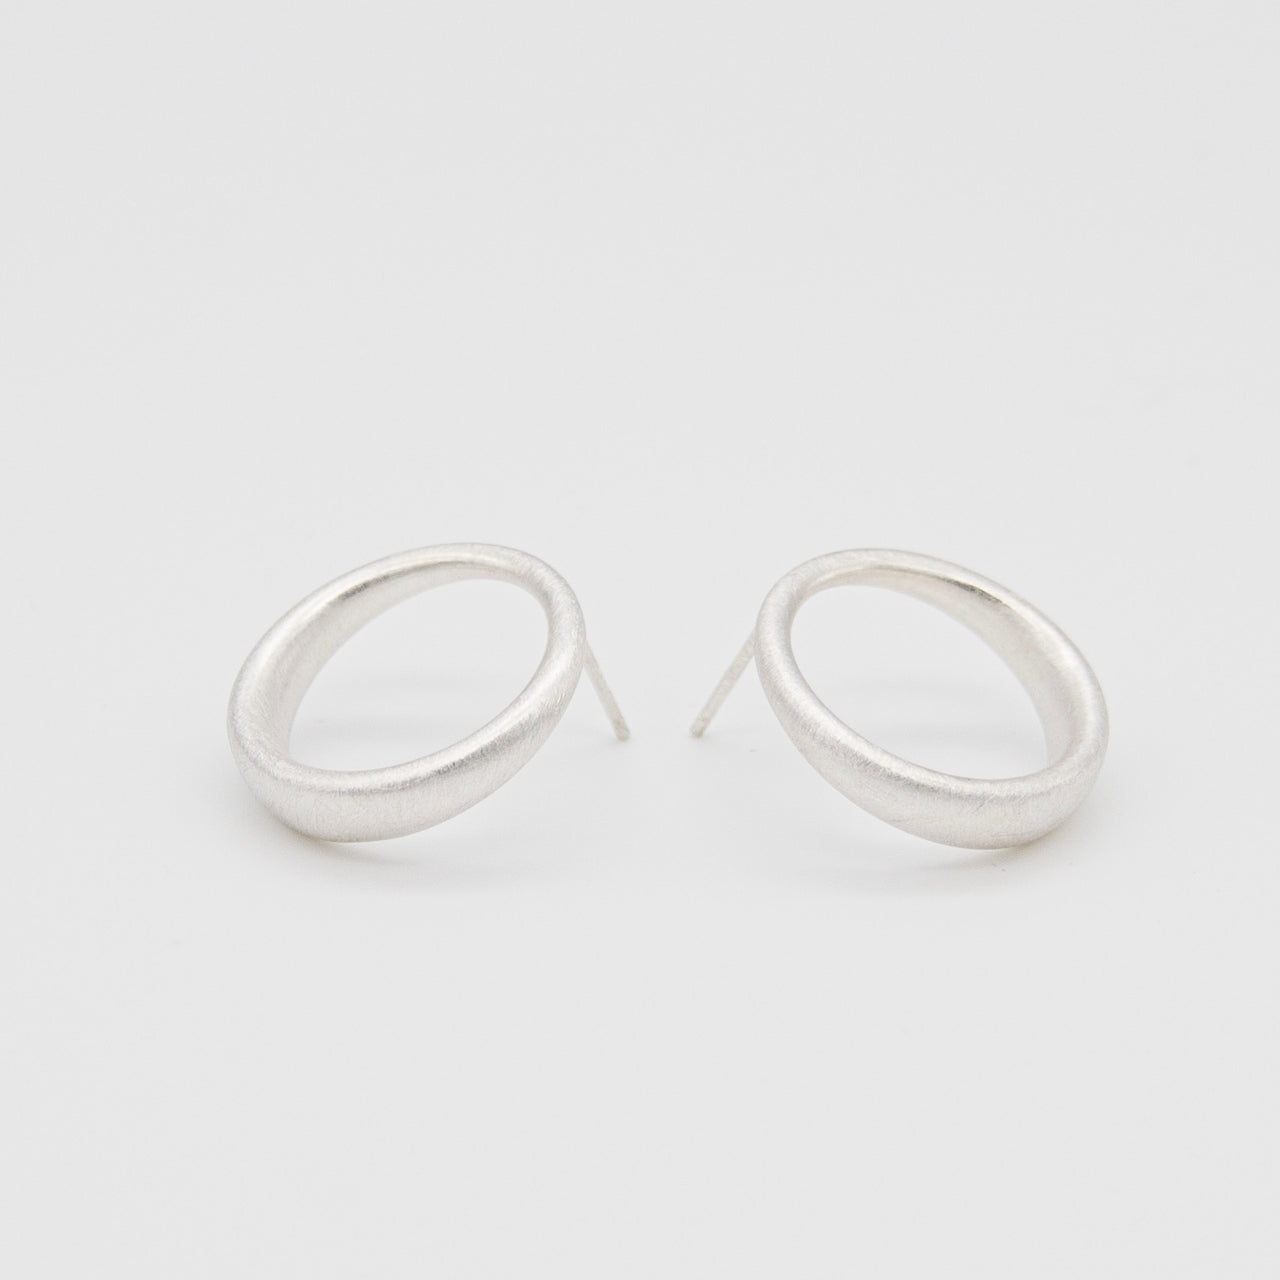 Curved Curves Circle Earrings Silver